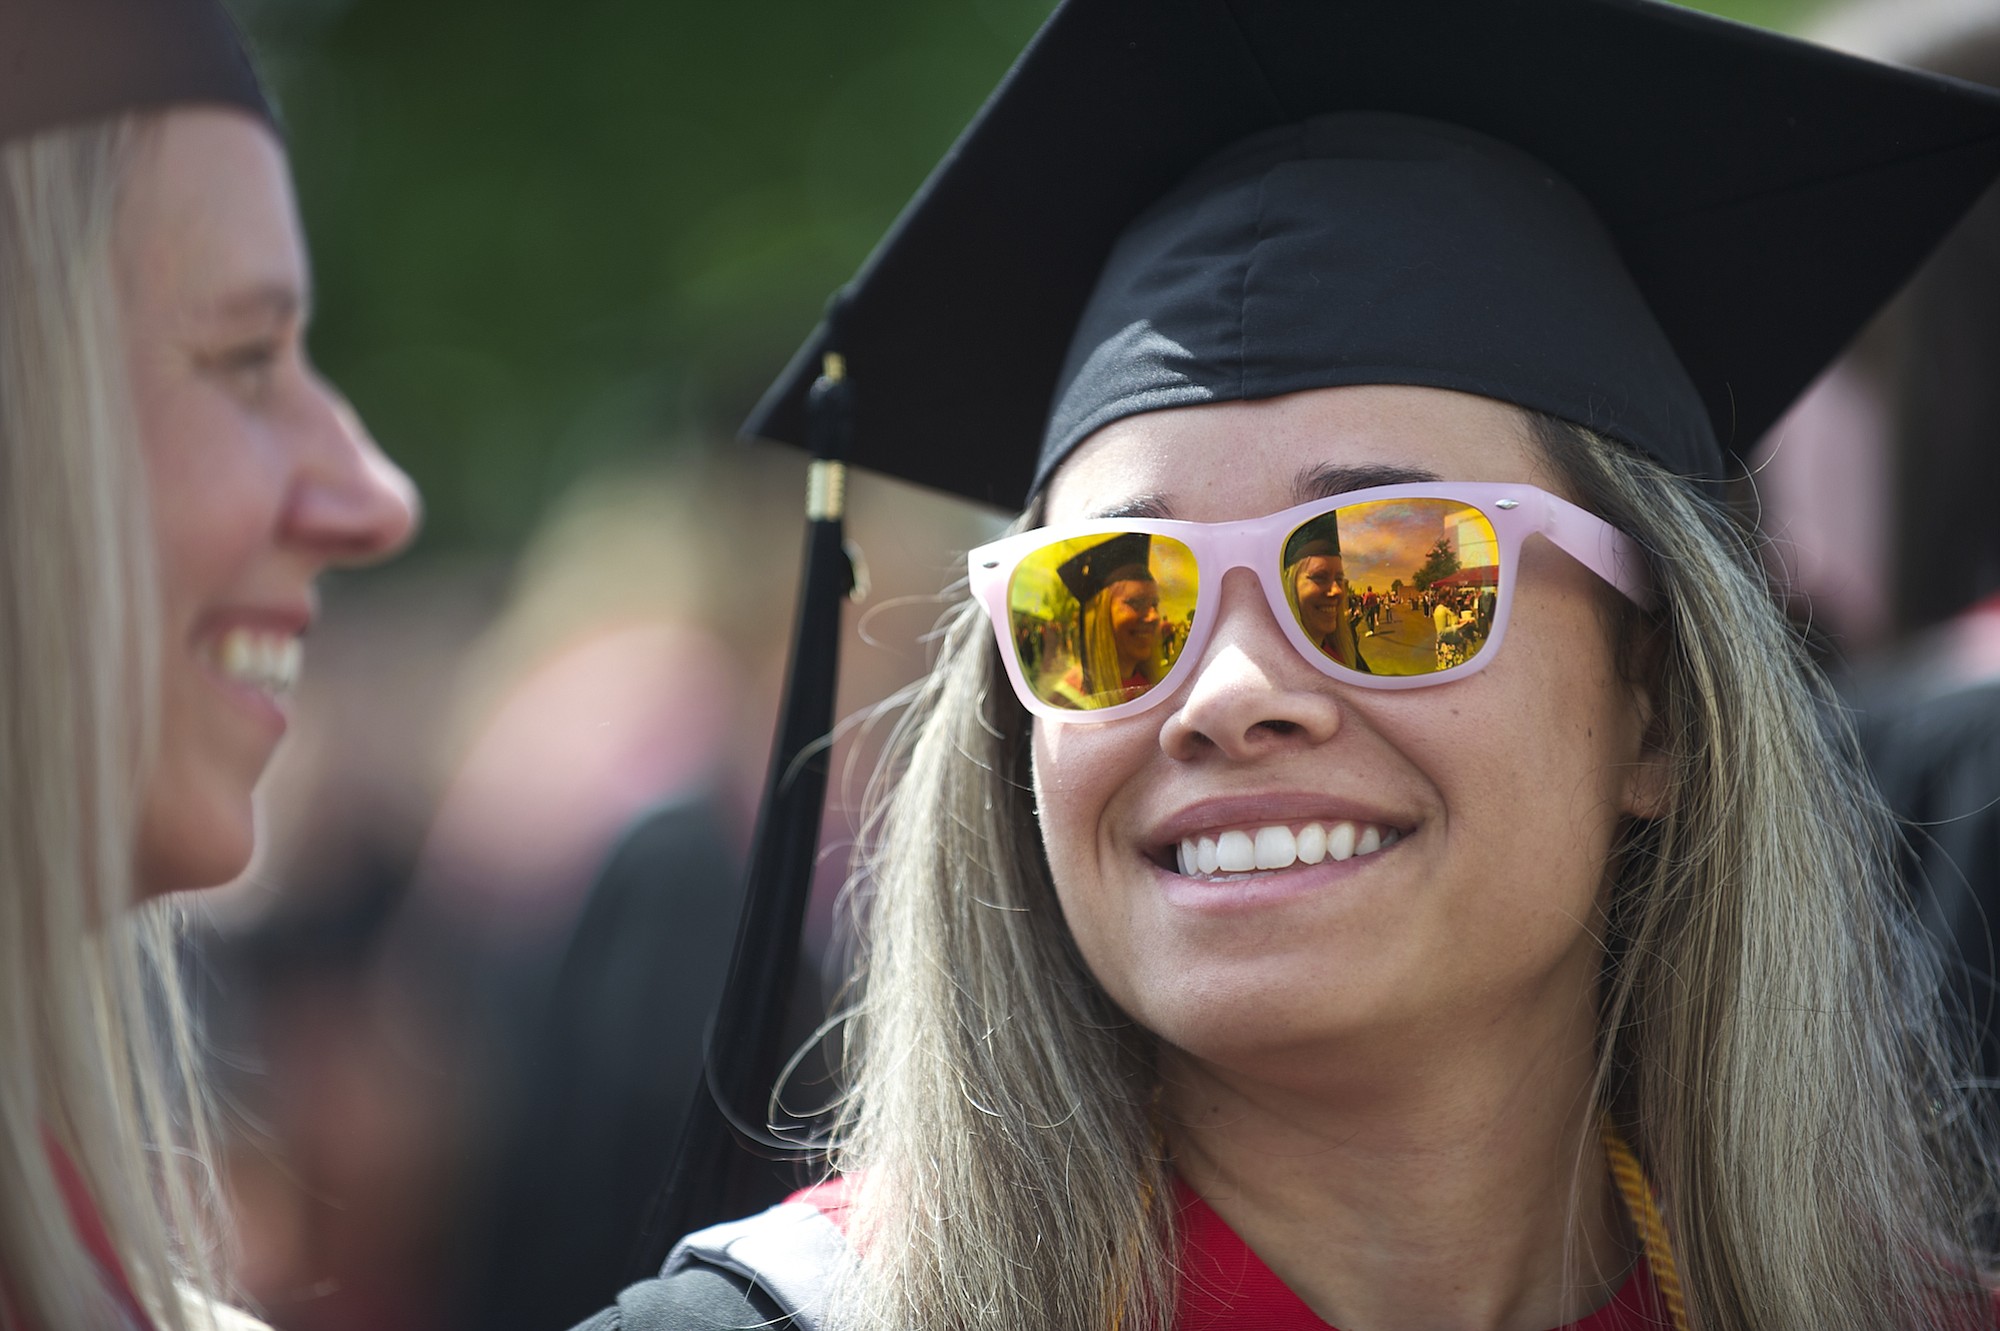 Elizabeth Roe, 27, of Chehalis, looks over at her fellow graduate and mother Jan Roe, 52, before the Washington State University Vancouver's 2013 commencement ceremony.